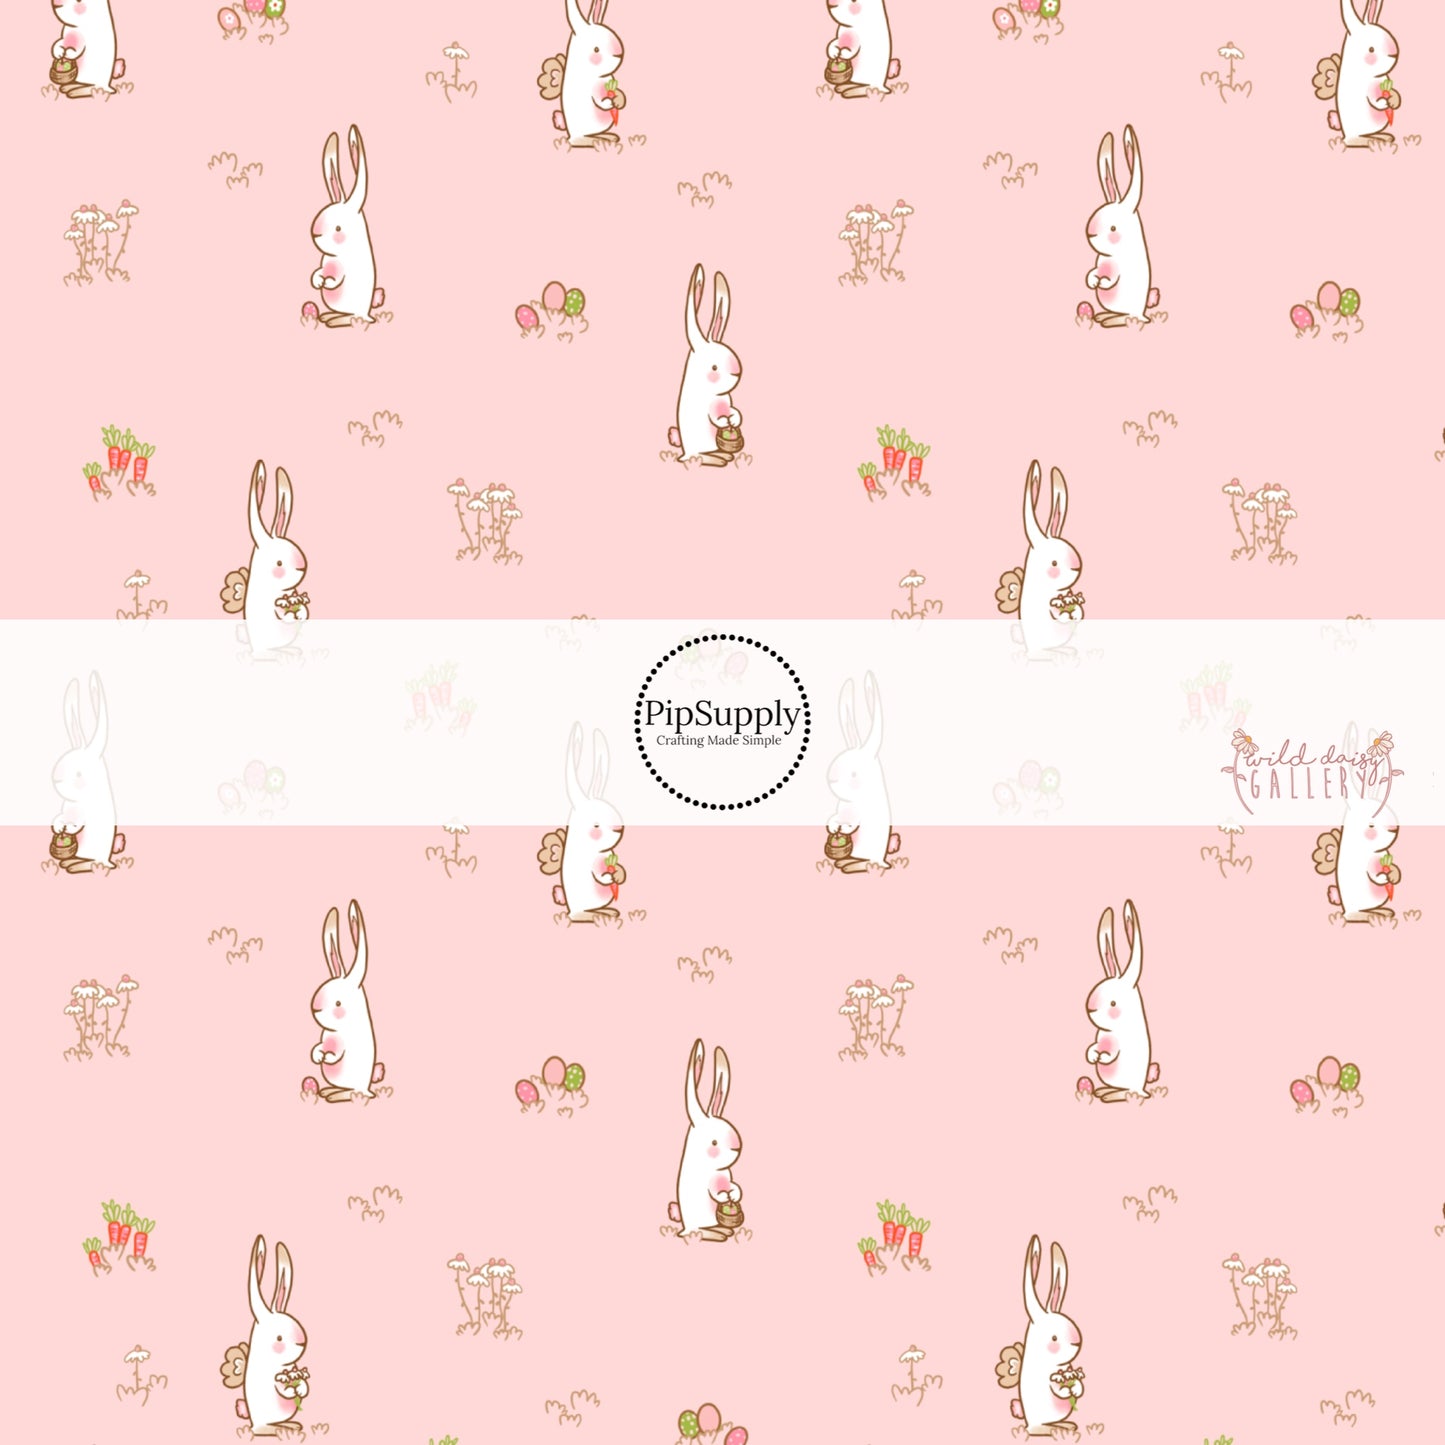 Light Pink fabric by the yard with Easter Bunnies, Easter eggs, and carrots